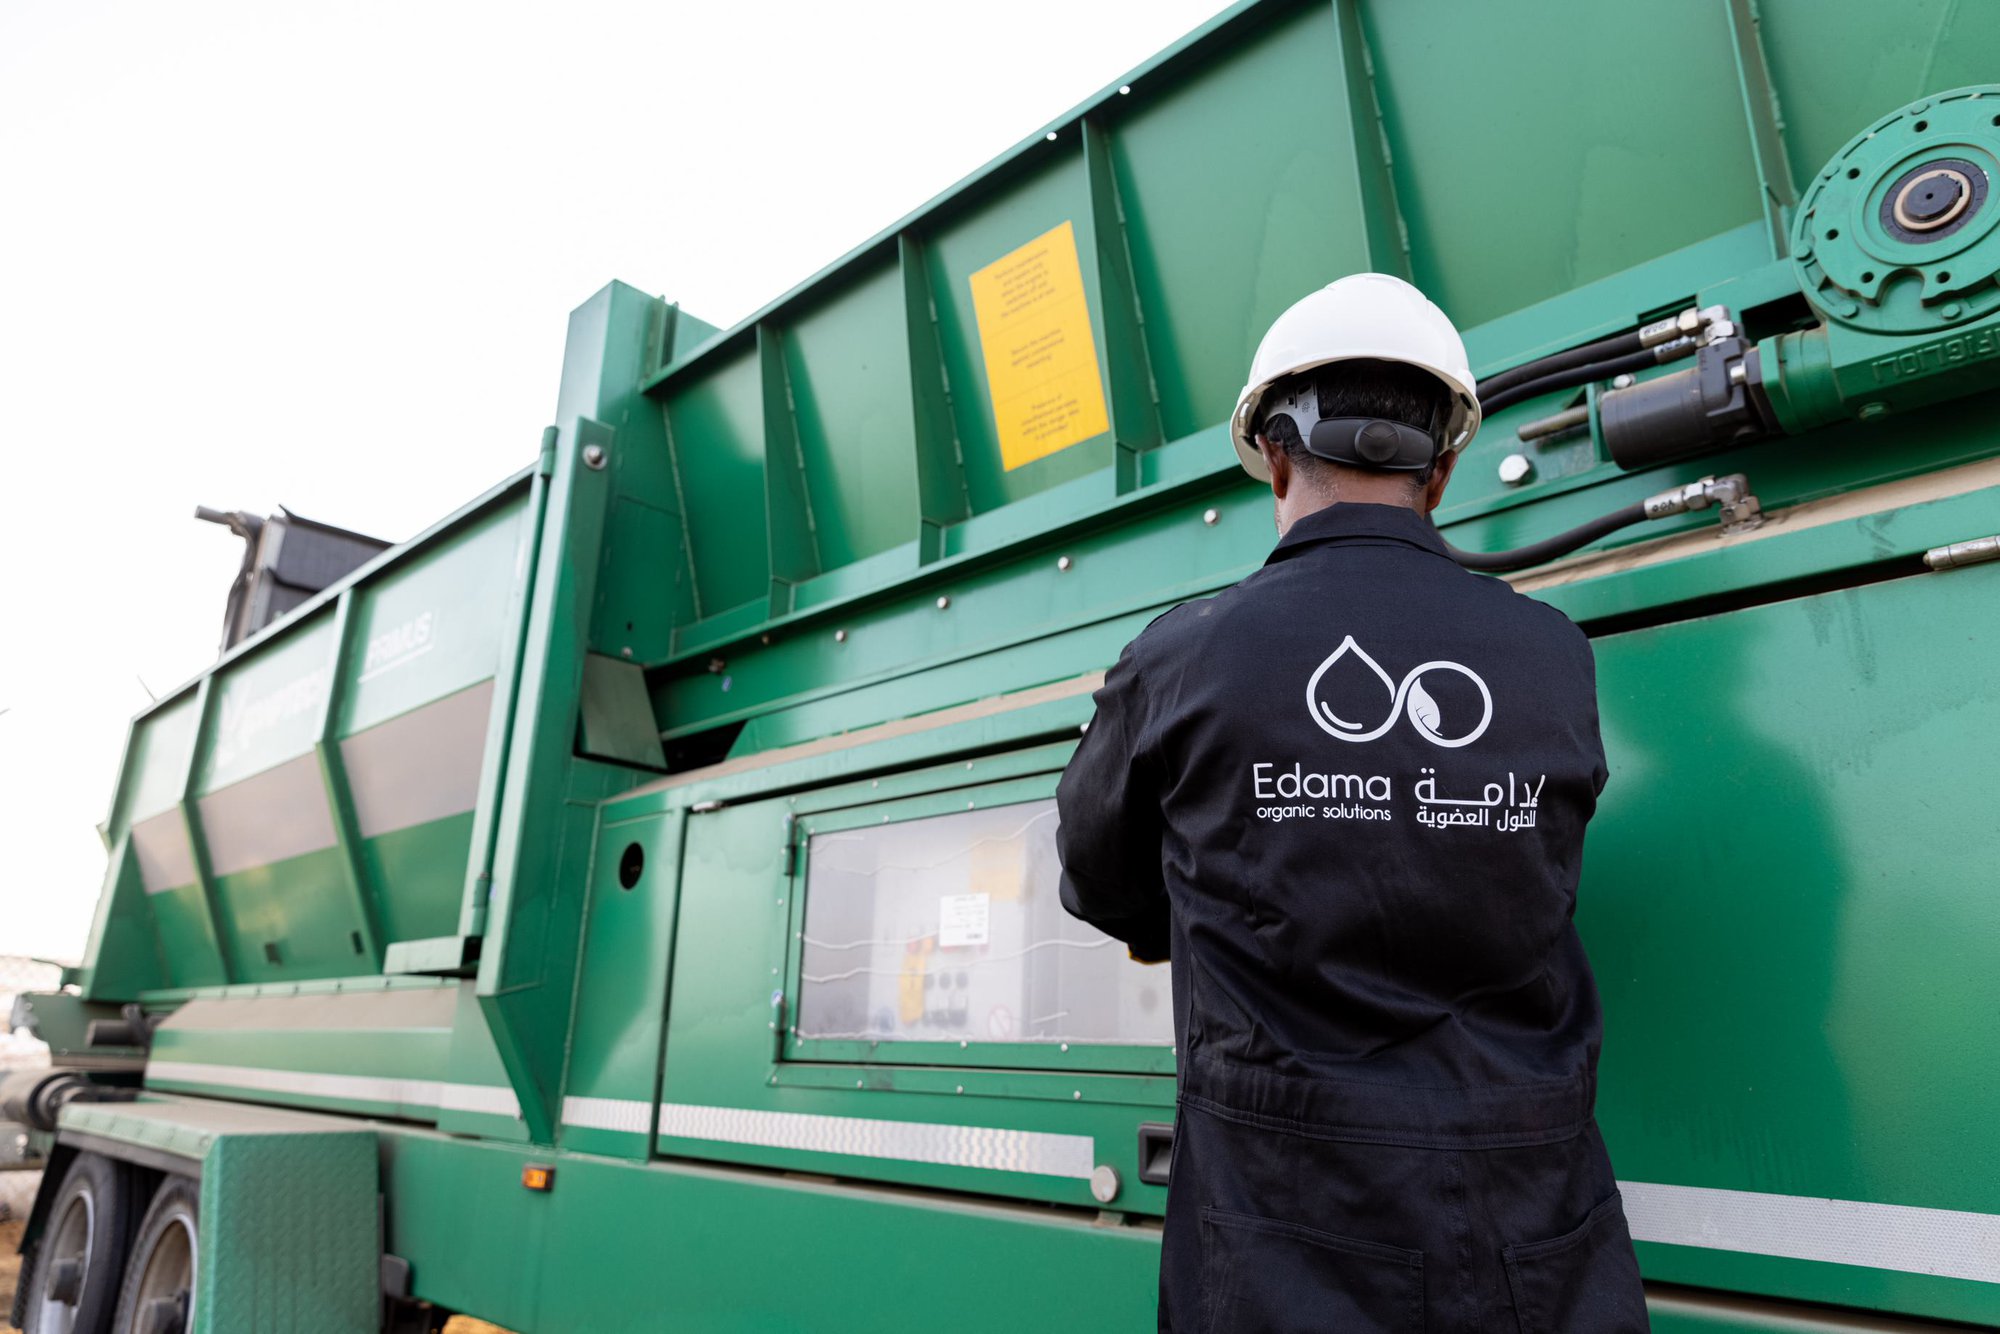 KAUST startup Edama opens first-of-its-kind waste recycling facility in Saudi Arabia